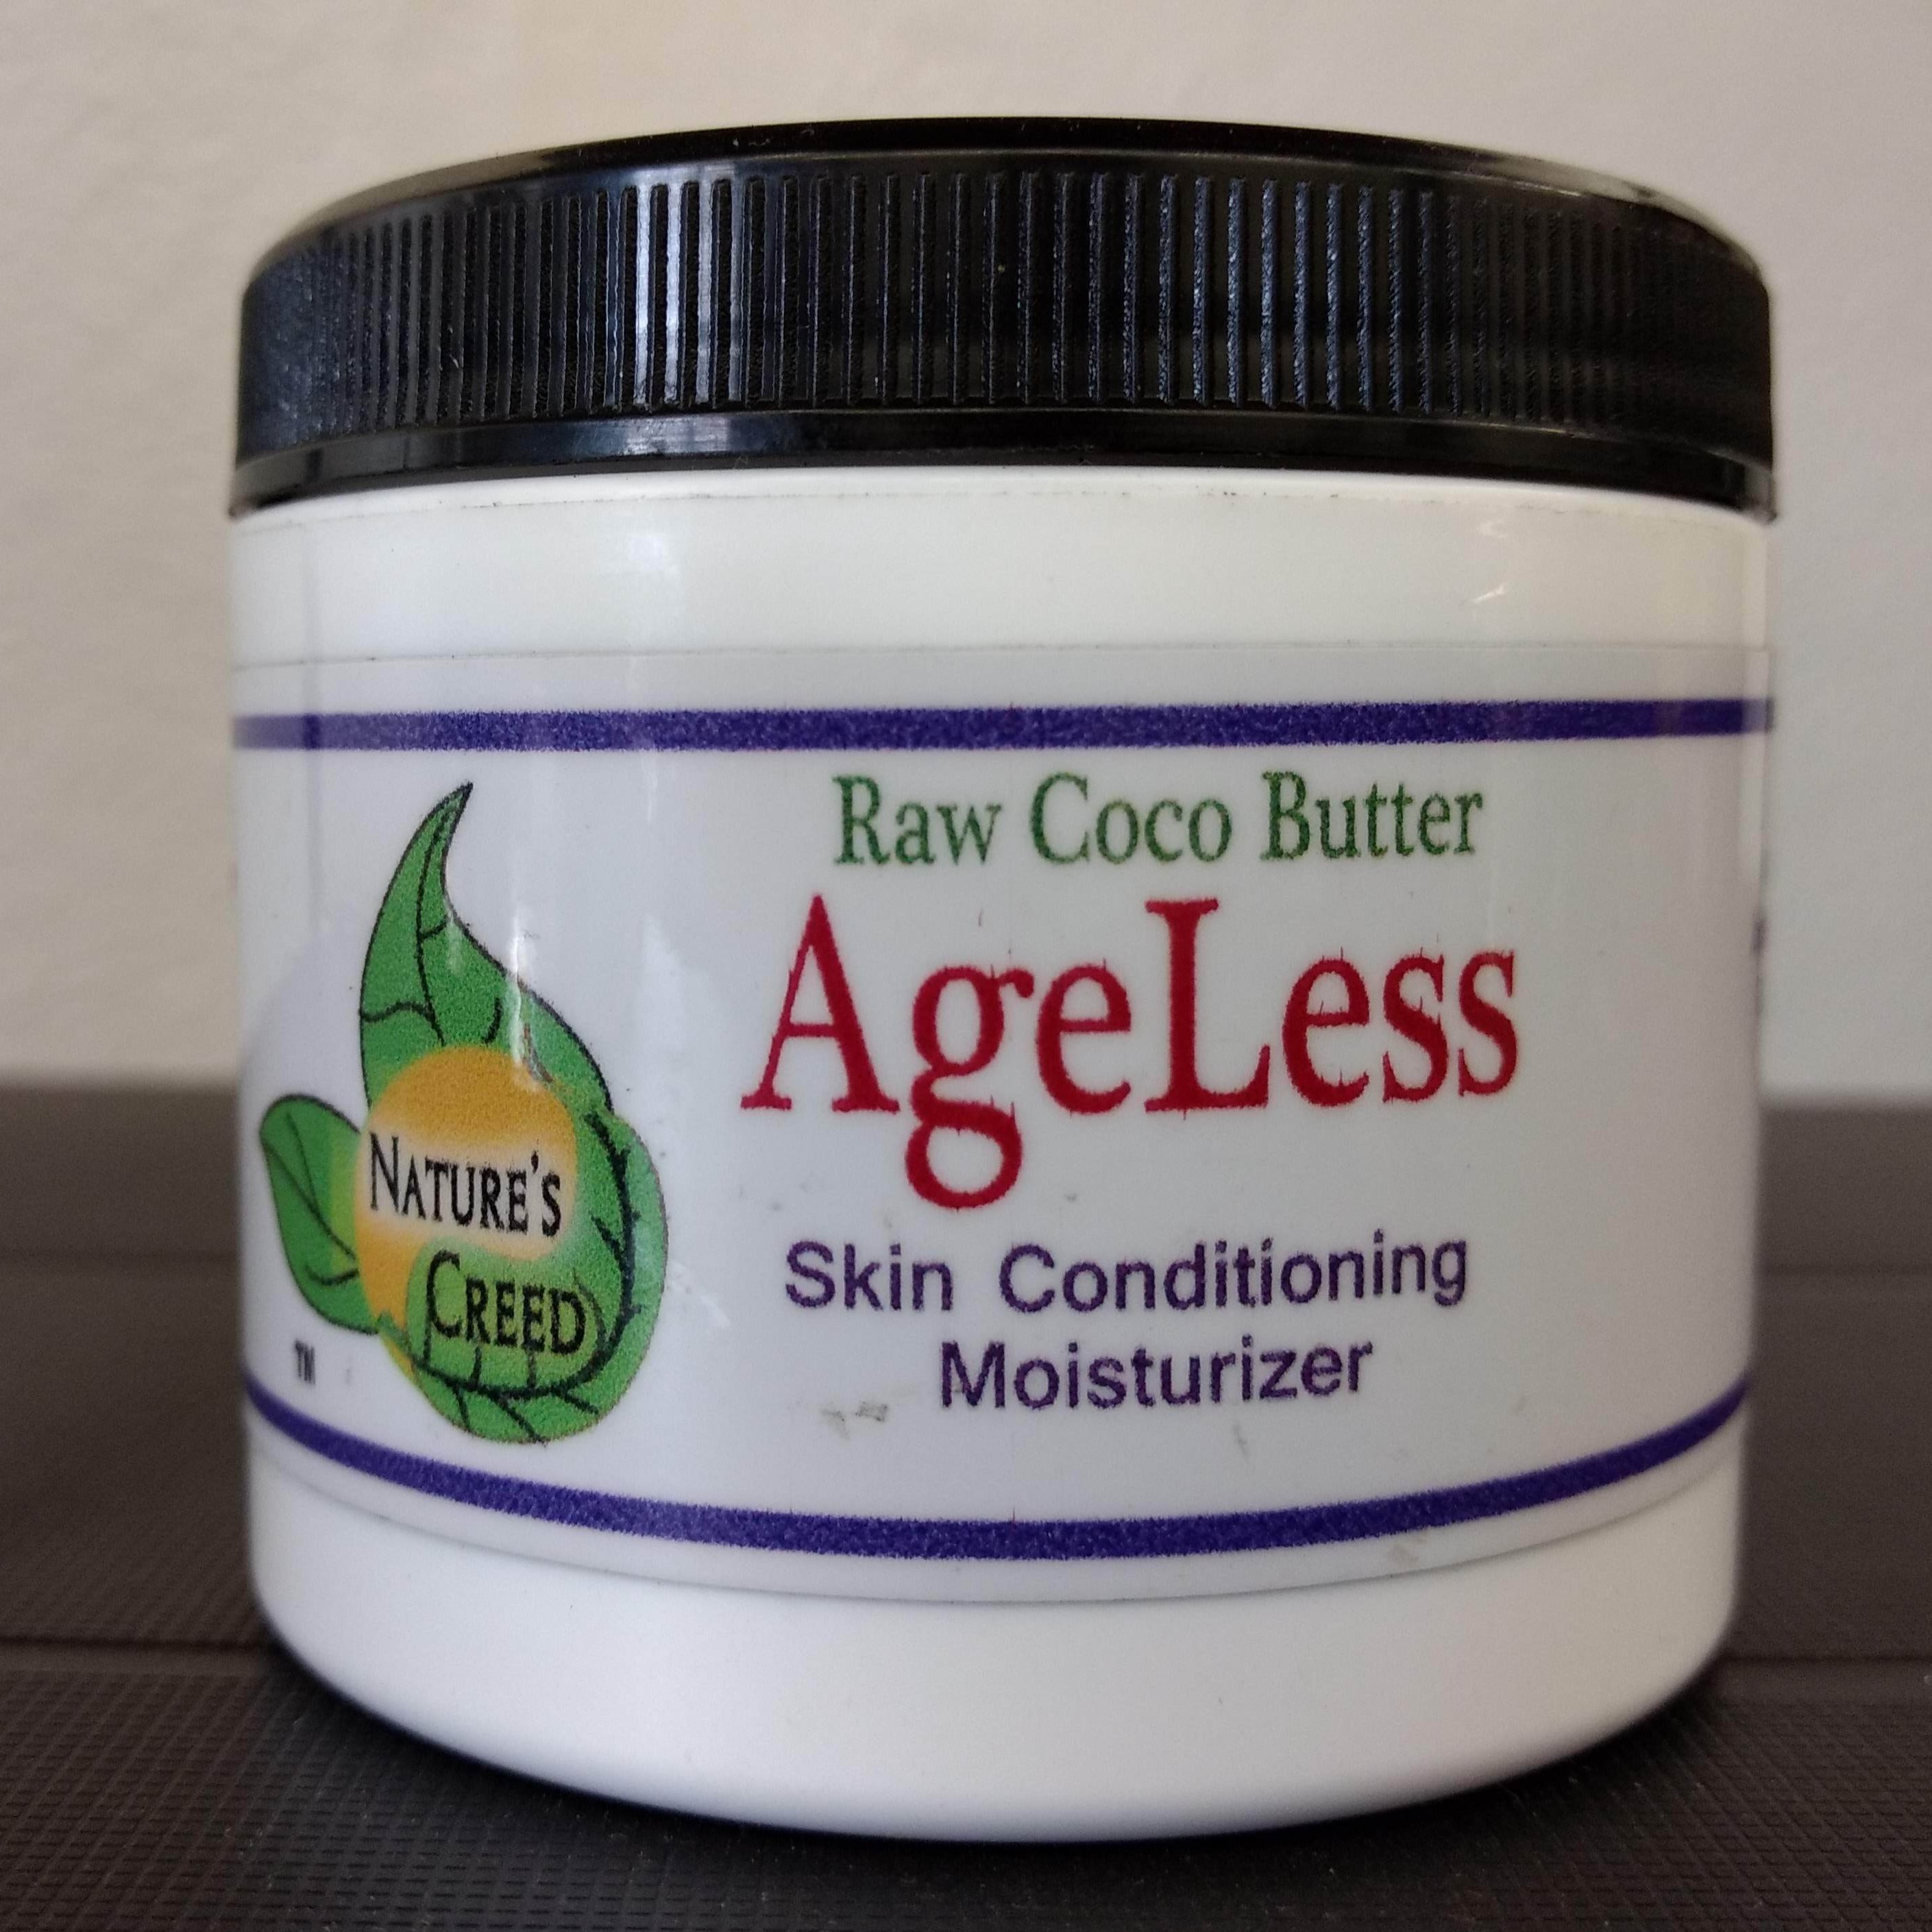 Ageless Skin Conditioning Moisturizer with Cocoa Butter